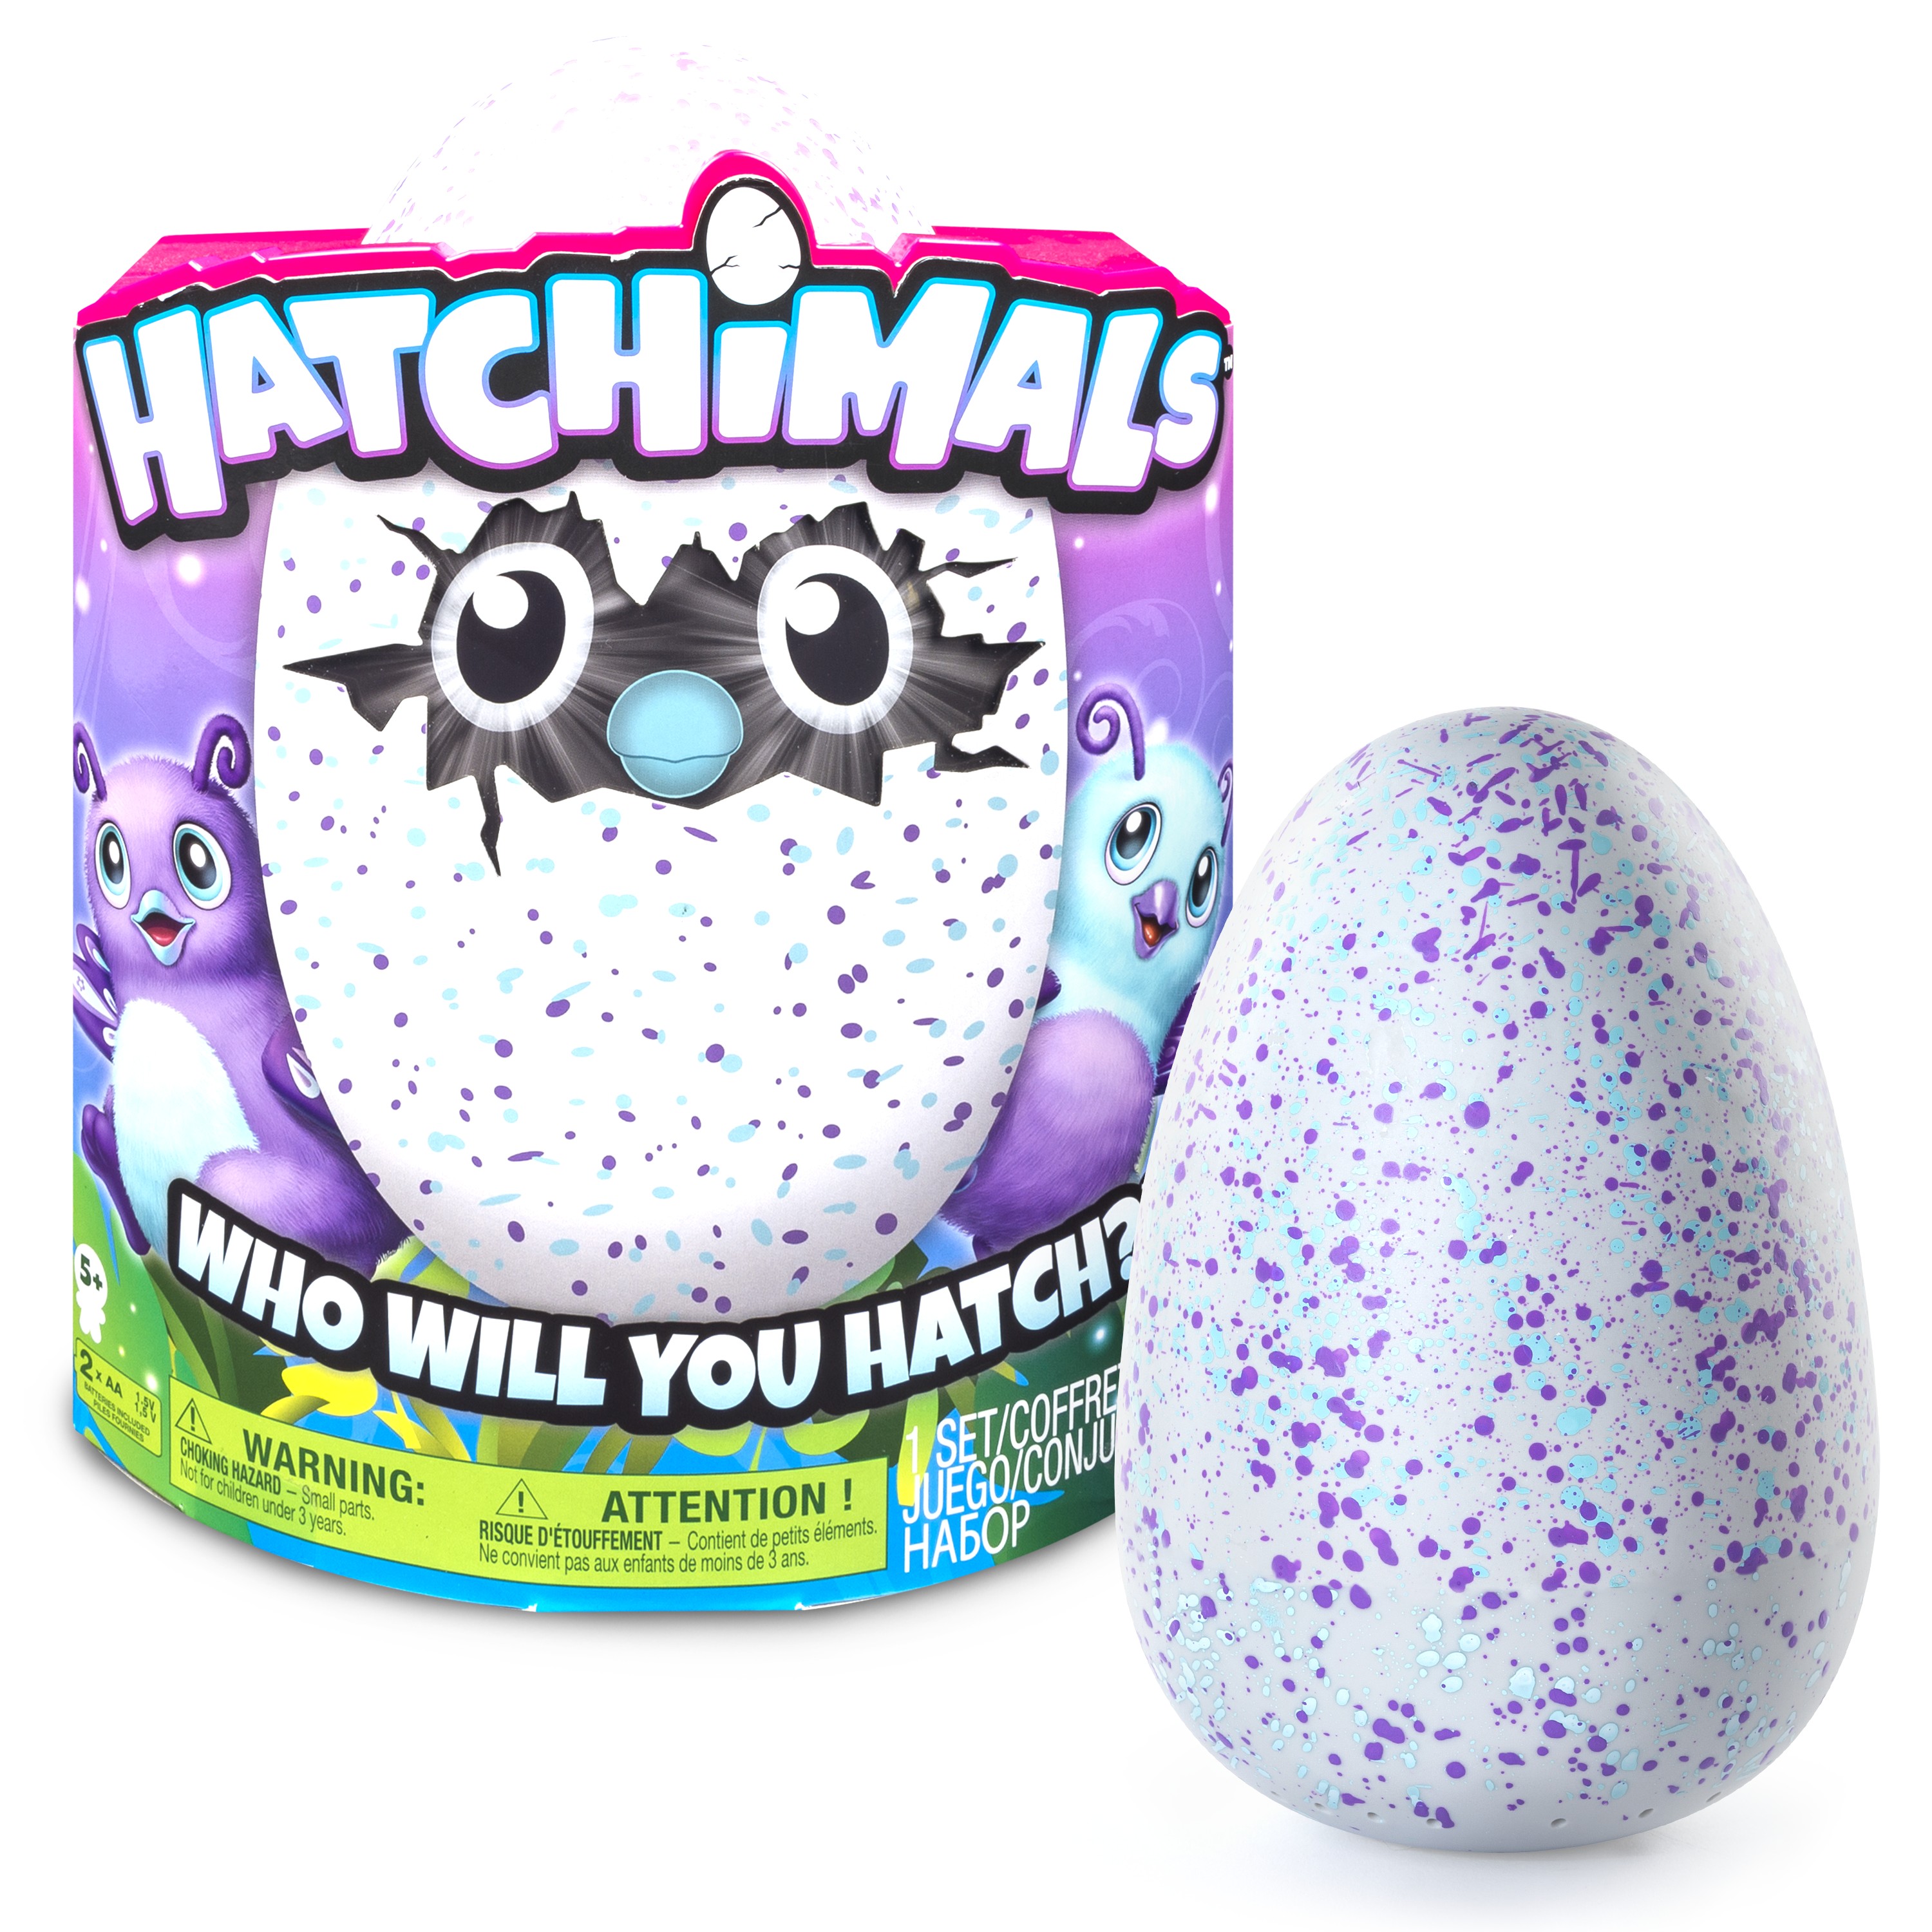 Hatchimals - Hatching Egg - Interactive Creature - Burtle - Purple/Teal Egg - Walmart Exclusive by Spin Master - image 2 of 7